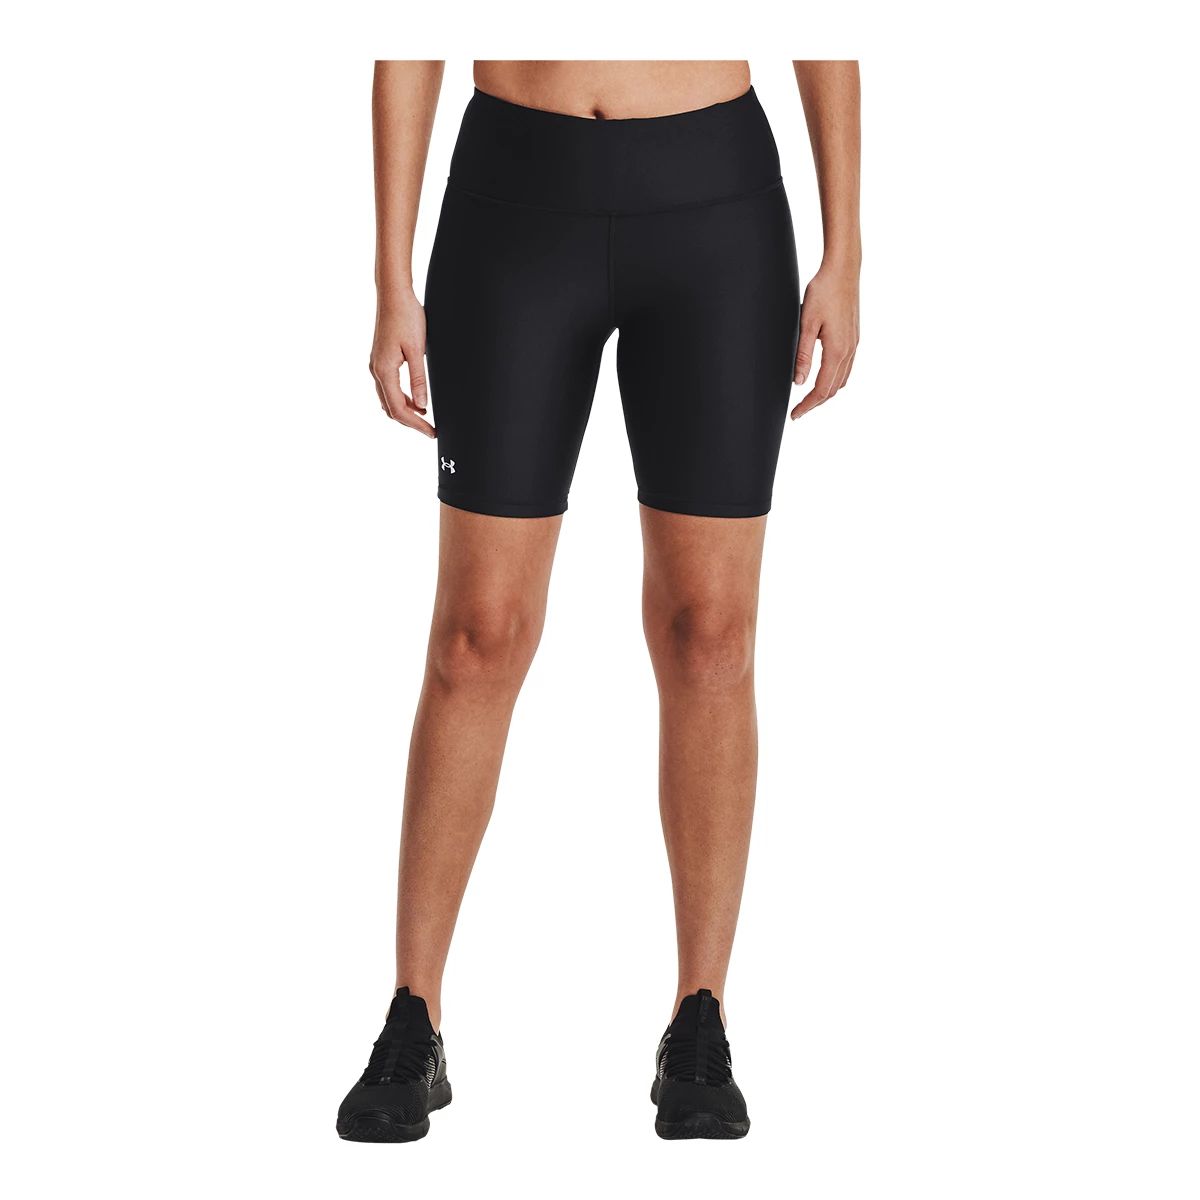 Women's Fitness Crop Top or Bike Shorts offer at ALDI